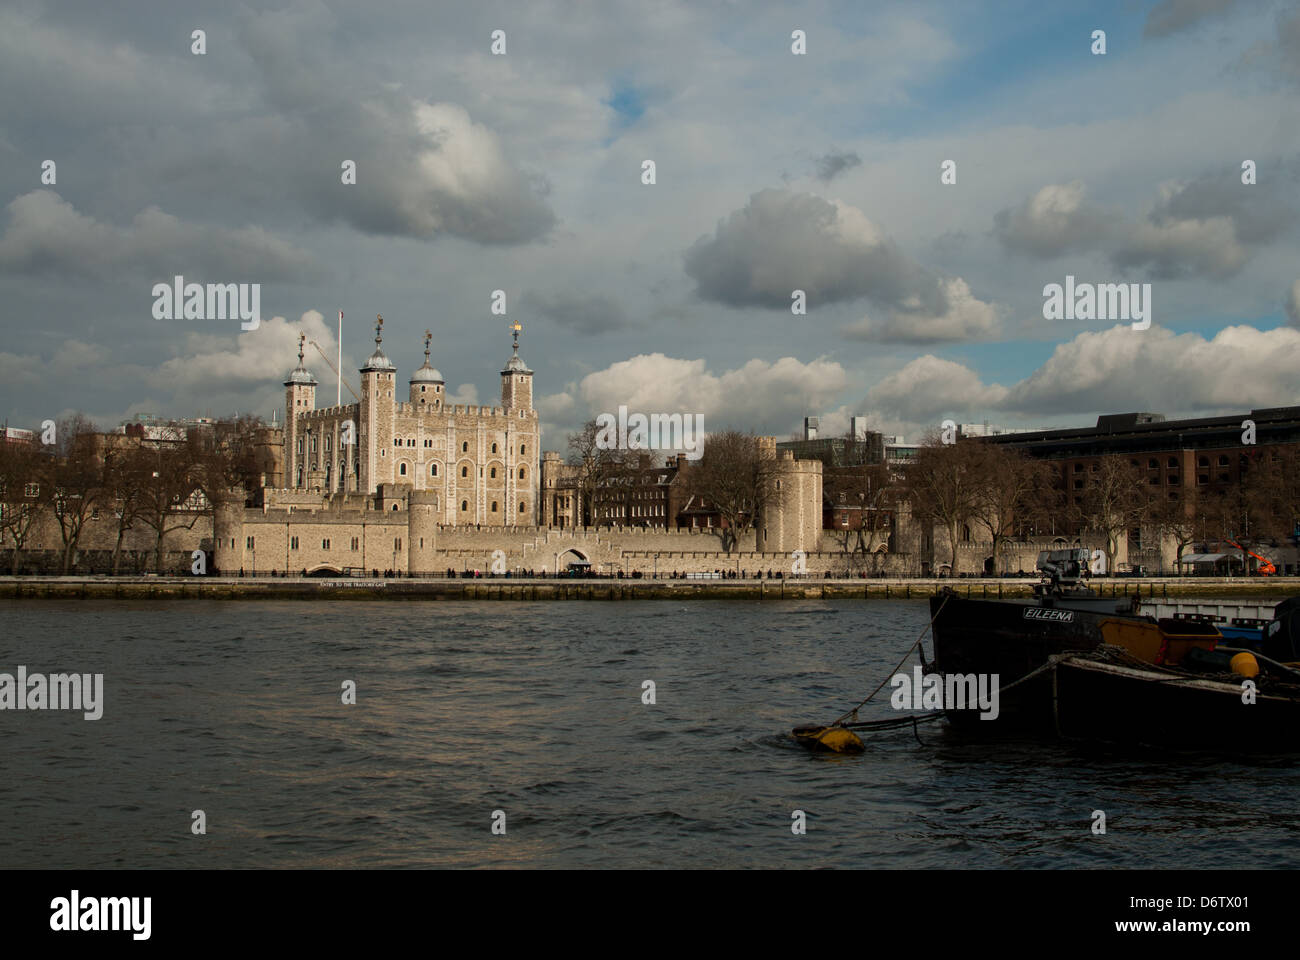 Tower of London over the River Thames, London, England. Stock Photo